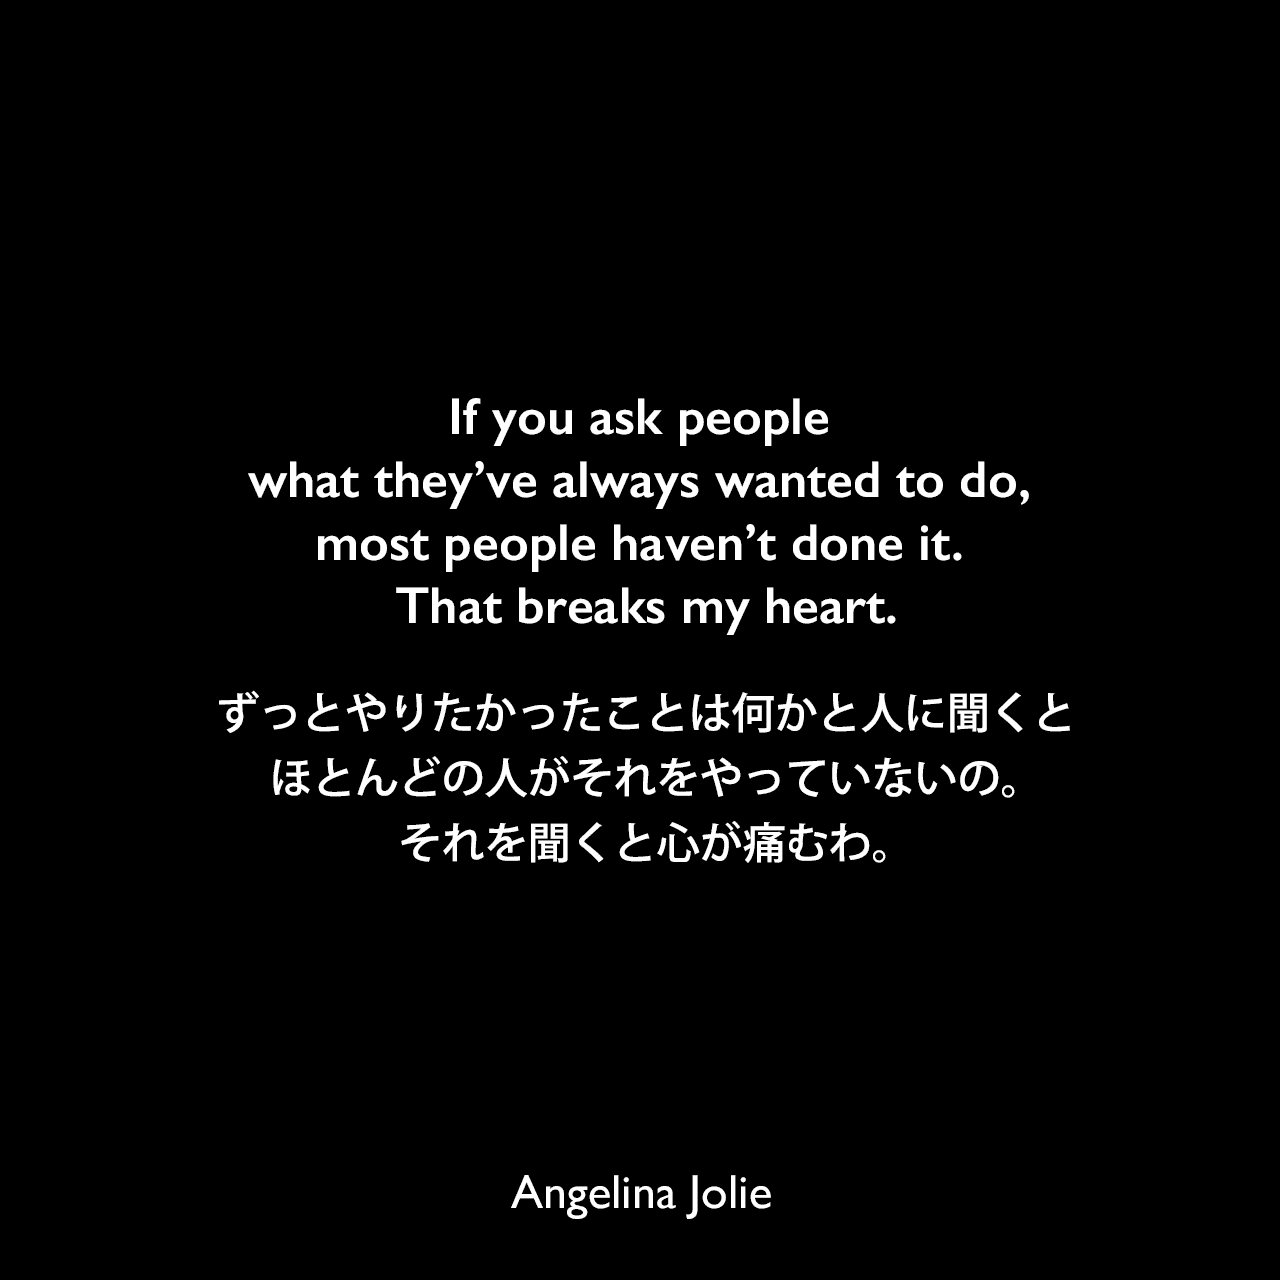 If you ask people what they’ve always wanted to do, most people haven’t done it. That breaks my heart.ずっとやりたかったことは何かと人に聞くと、ほとんどの人がそれをやっていないの。それを聞くと心が痛むわ。Angelina Jolie